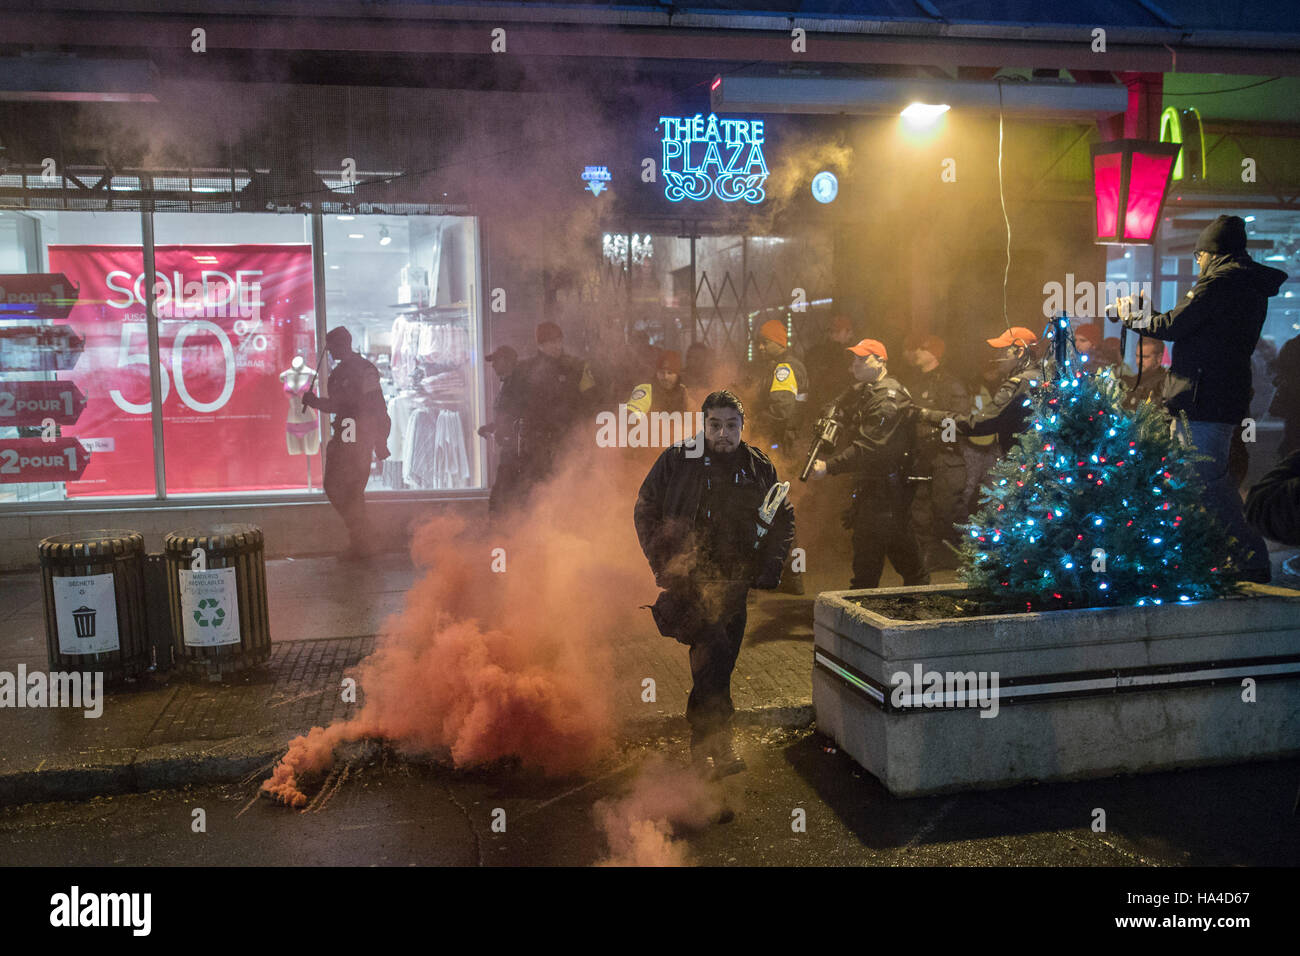 Montreal, Quebec, Canada. 26th November, 2016. Police outside the Theatre Plaza after demonstrators clashed with police and security in protest against a concert by Polish black metal rock band Graveland. Protesters labelling themselves 'anti-fascists militants' were protesting what they call a racist band. Dario Ayala/Alamy Live News Stock Photo